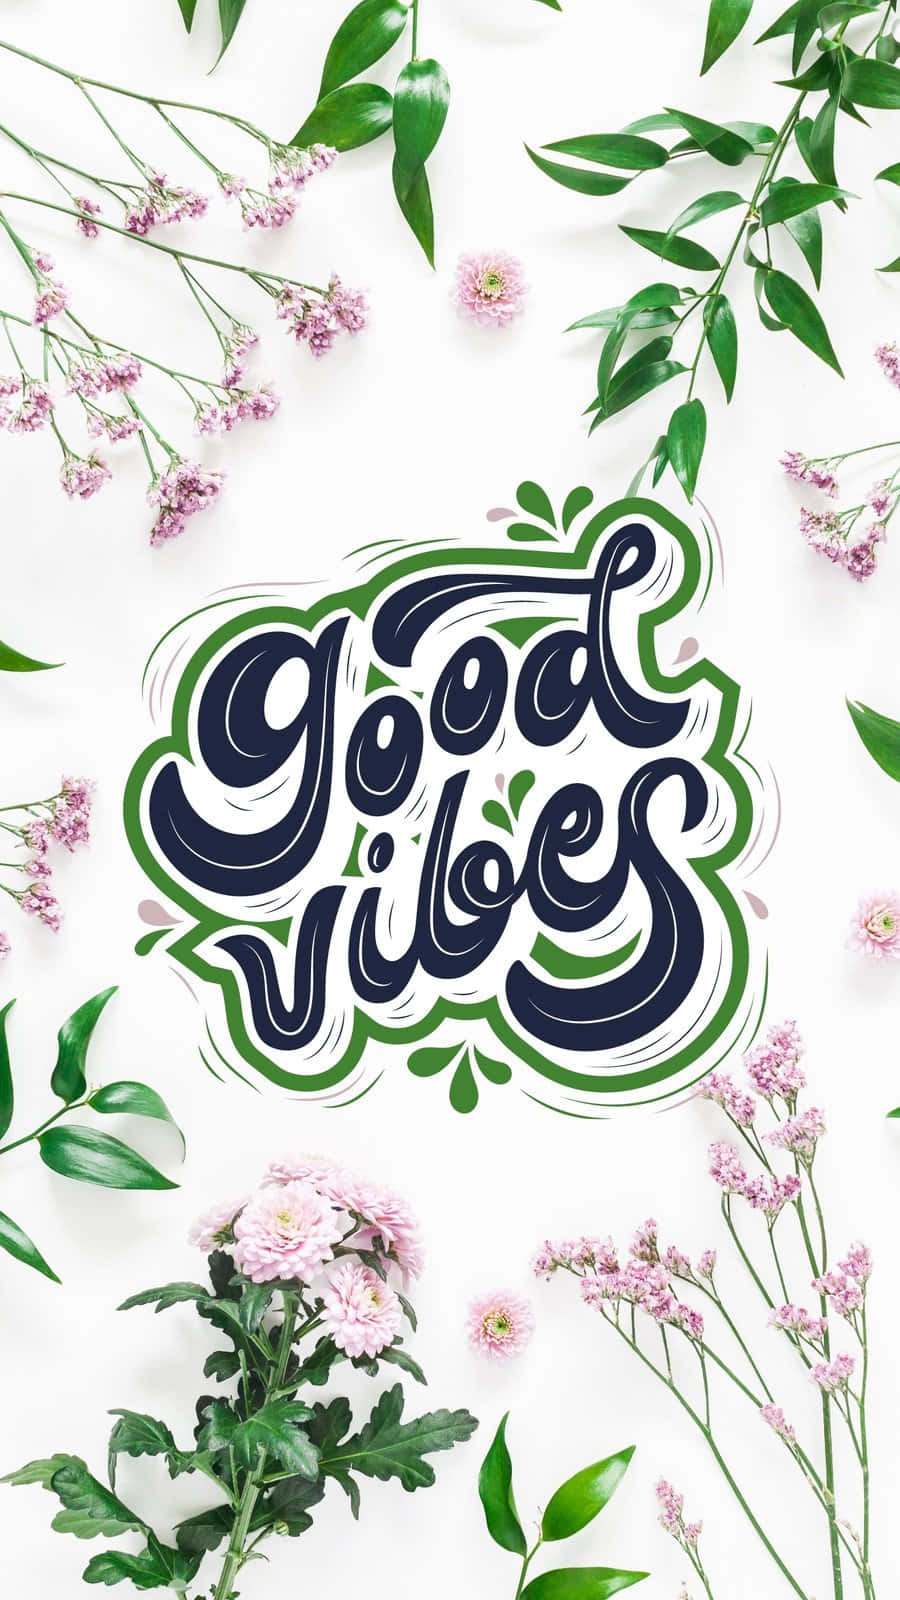 Floral Good Vibe Calligraphy Wallpaper